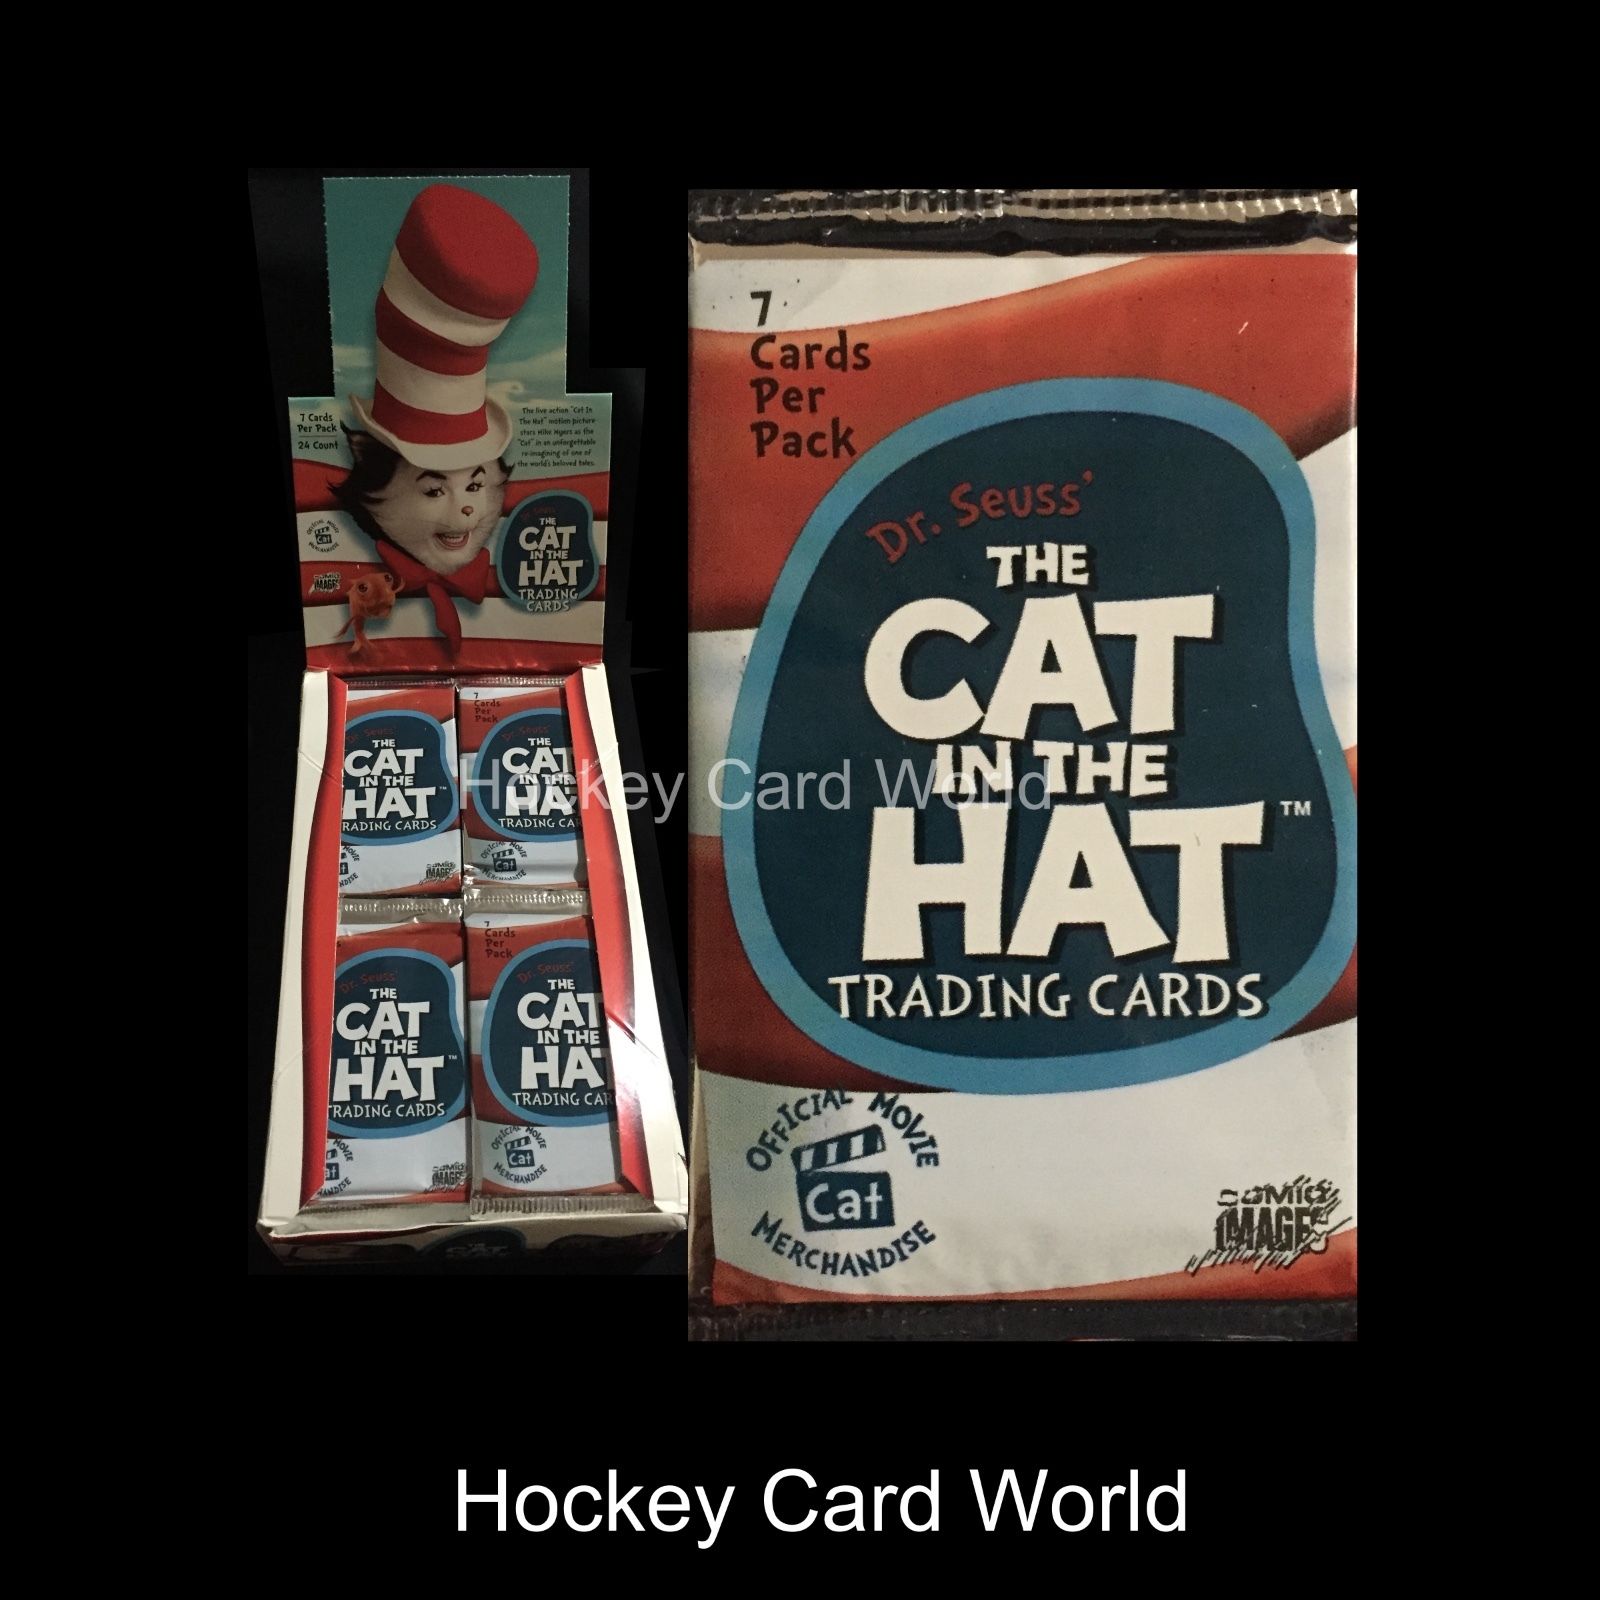  2003 Comic Dr. Seuss The Cat In The Hat Trading 7 Card Sealed Hobby Pack  Image 1